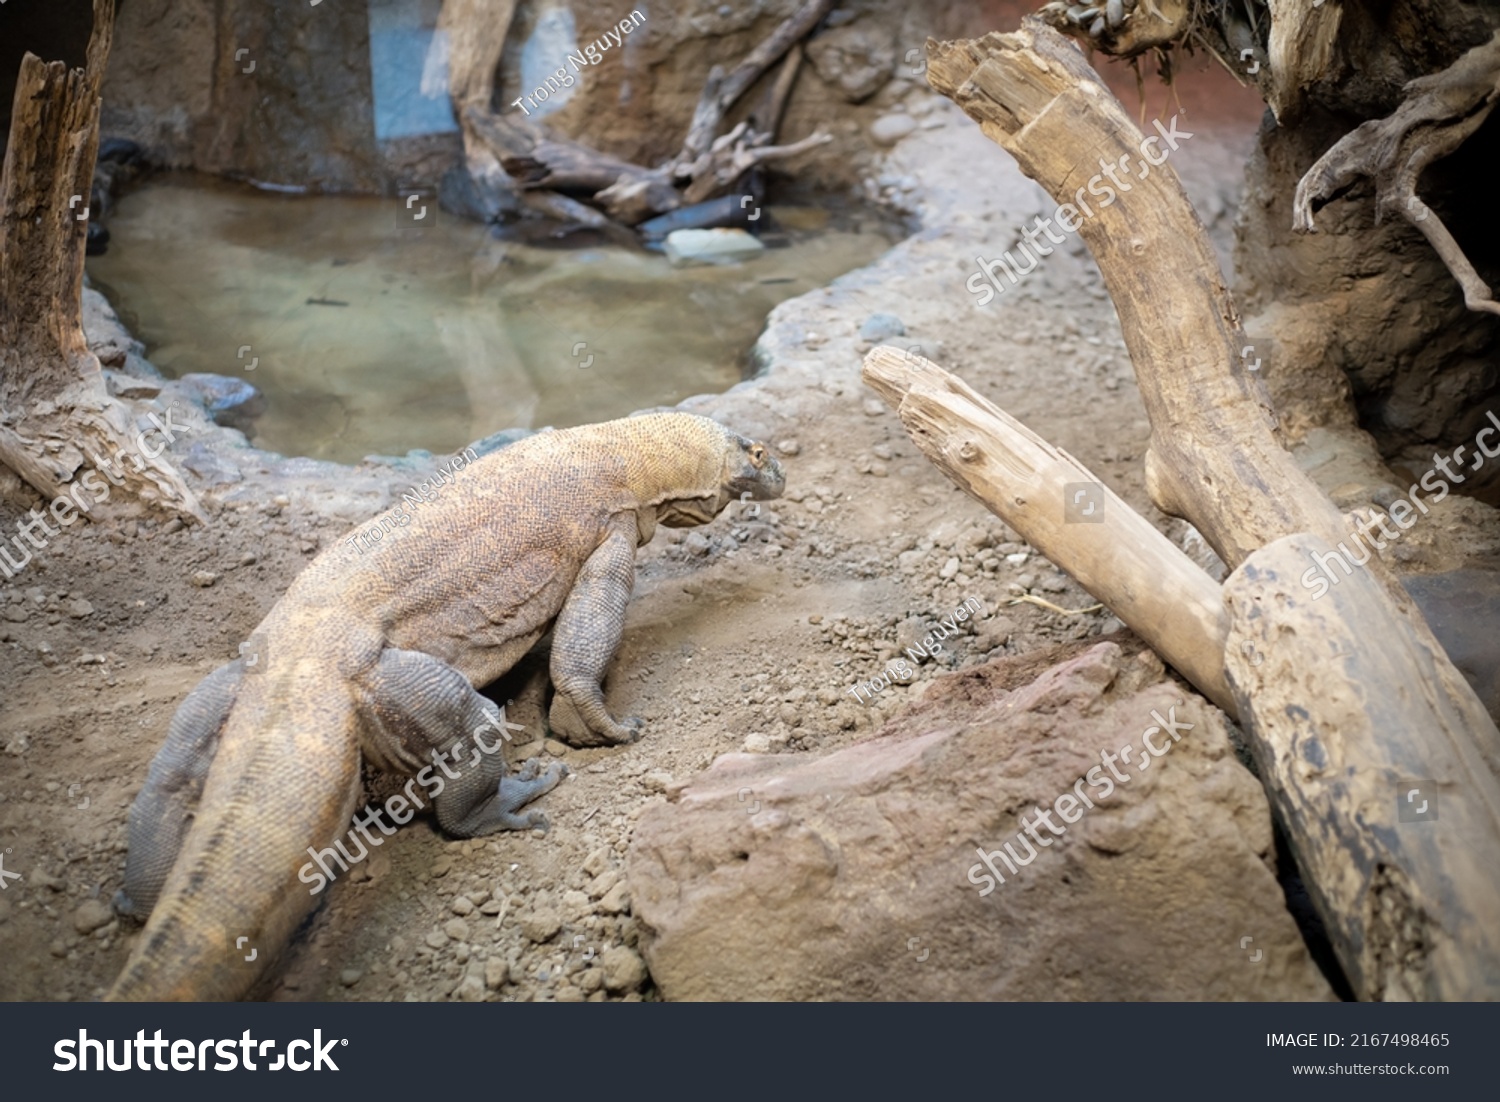 Rear view of a giant Komodo dragon or Varanus komodoensis in natural habitat with tree trunks, branches and pond of zoo in North Texas, America. Komodo monitor a member of lizard family #2167498465